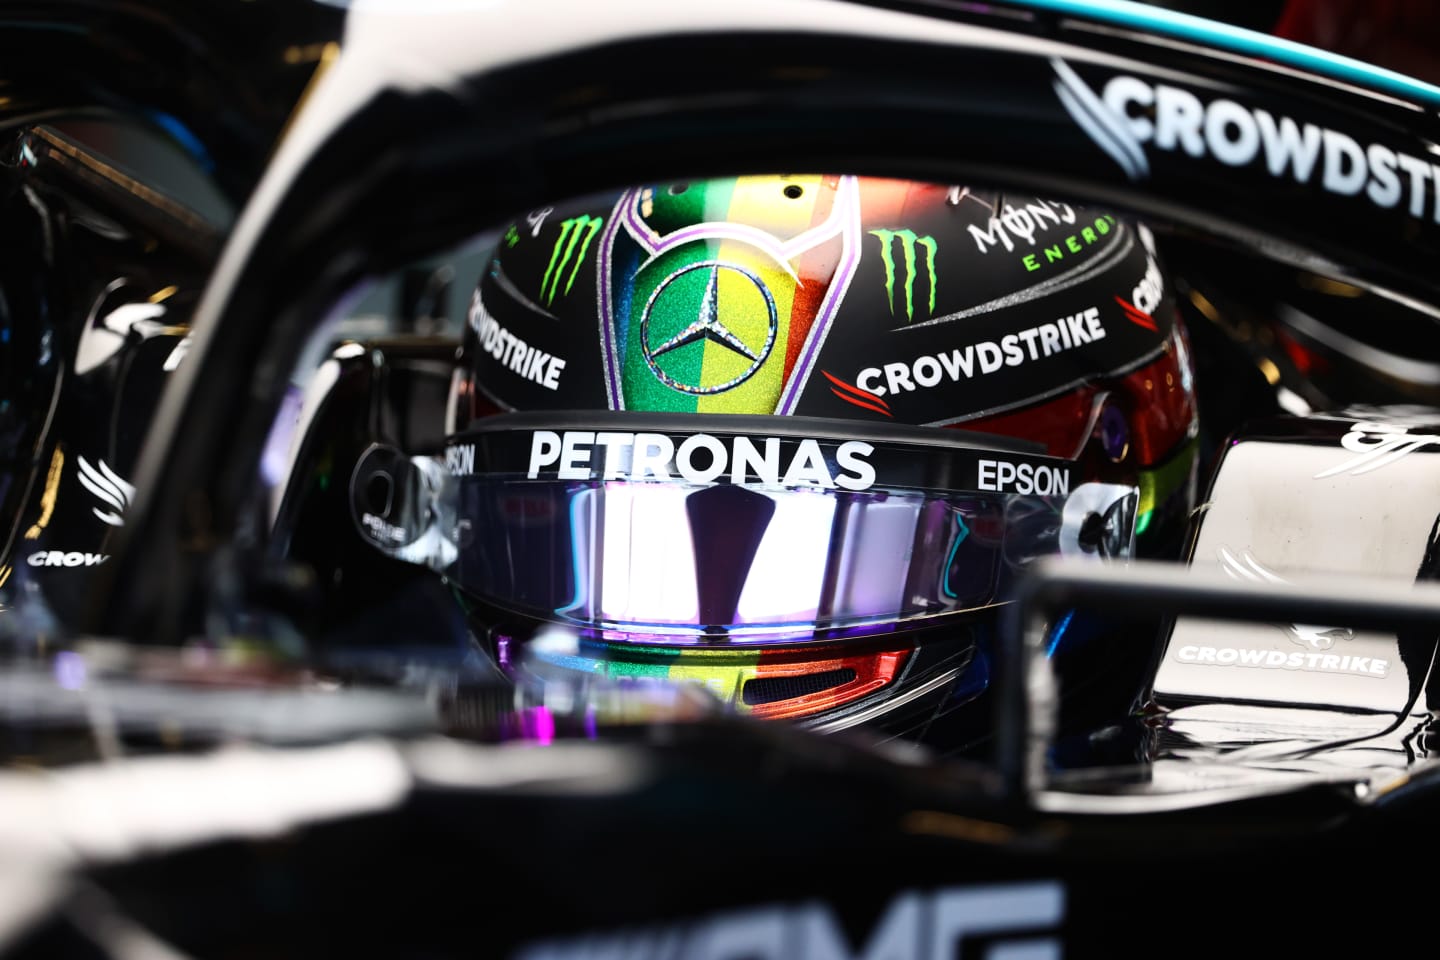 ABU DHABI, UNITED ARAB EMIRATES - DECEMBER 10: Lewis Hamilton of Great Britain and Mercedes GP prepares to drive during practice ahead of the F1 Grand Prix of Abu Dhabi at Yas Marina Circuit on December 10, 2021 in Abu Dhabi, United Arab Emirates. (Photo by Clive Rose/Getty Images)